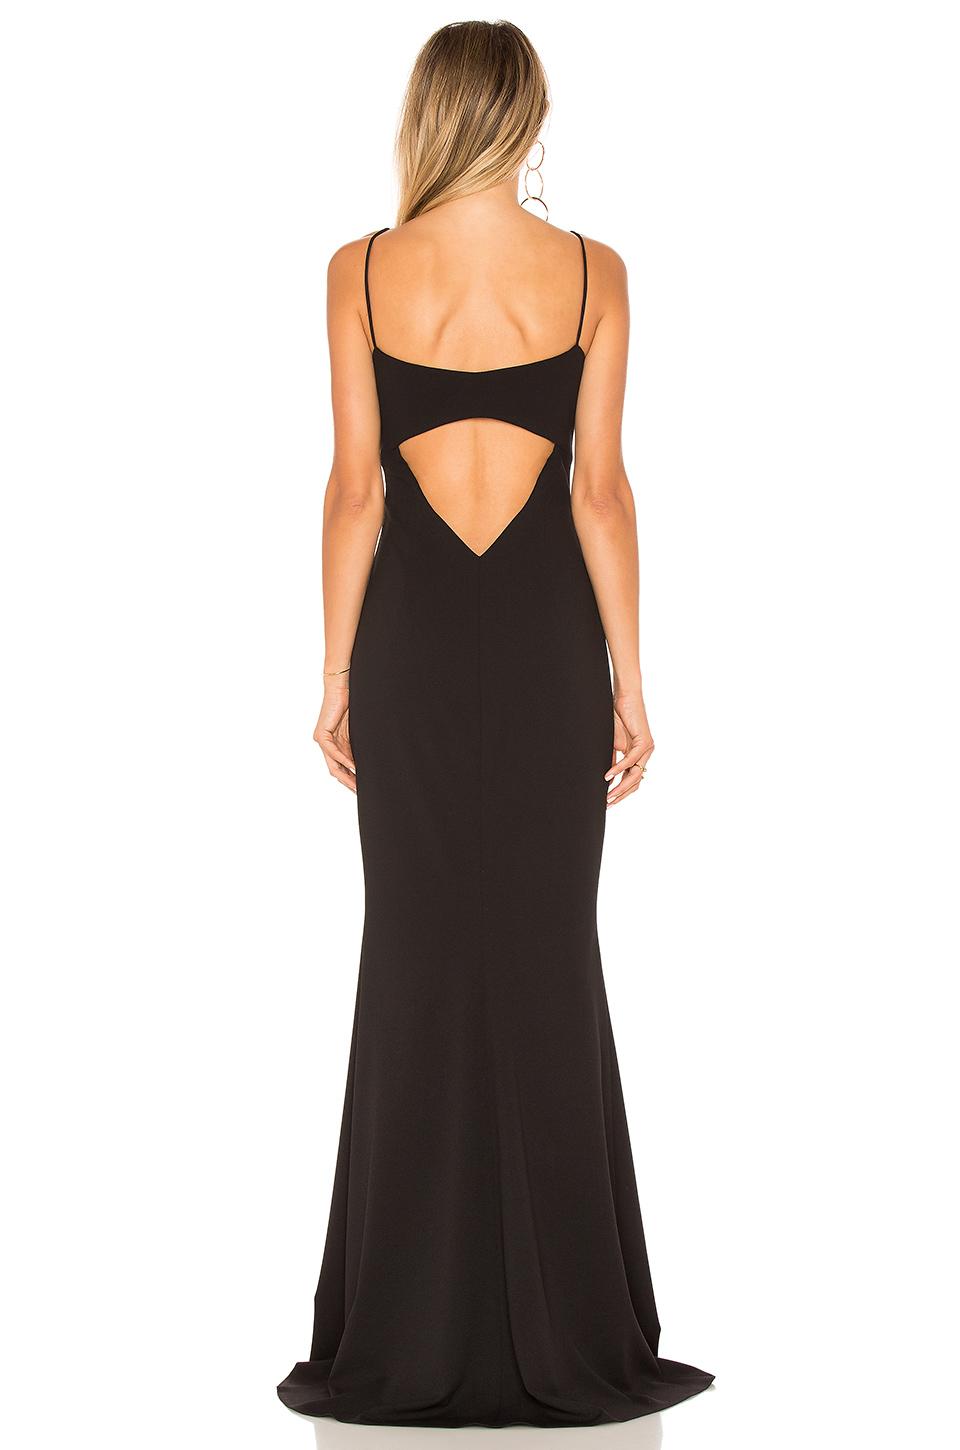 Katie May Synthetic Bambi Gown in Black - Lyst